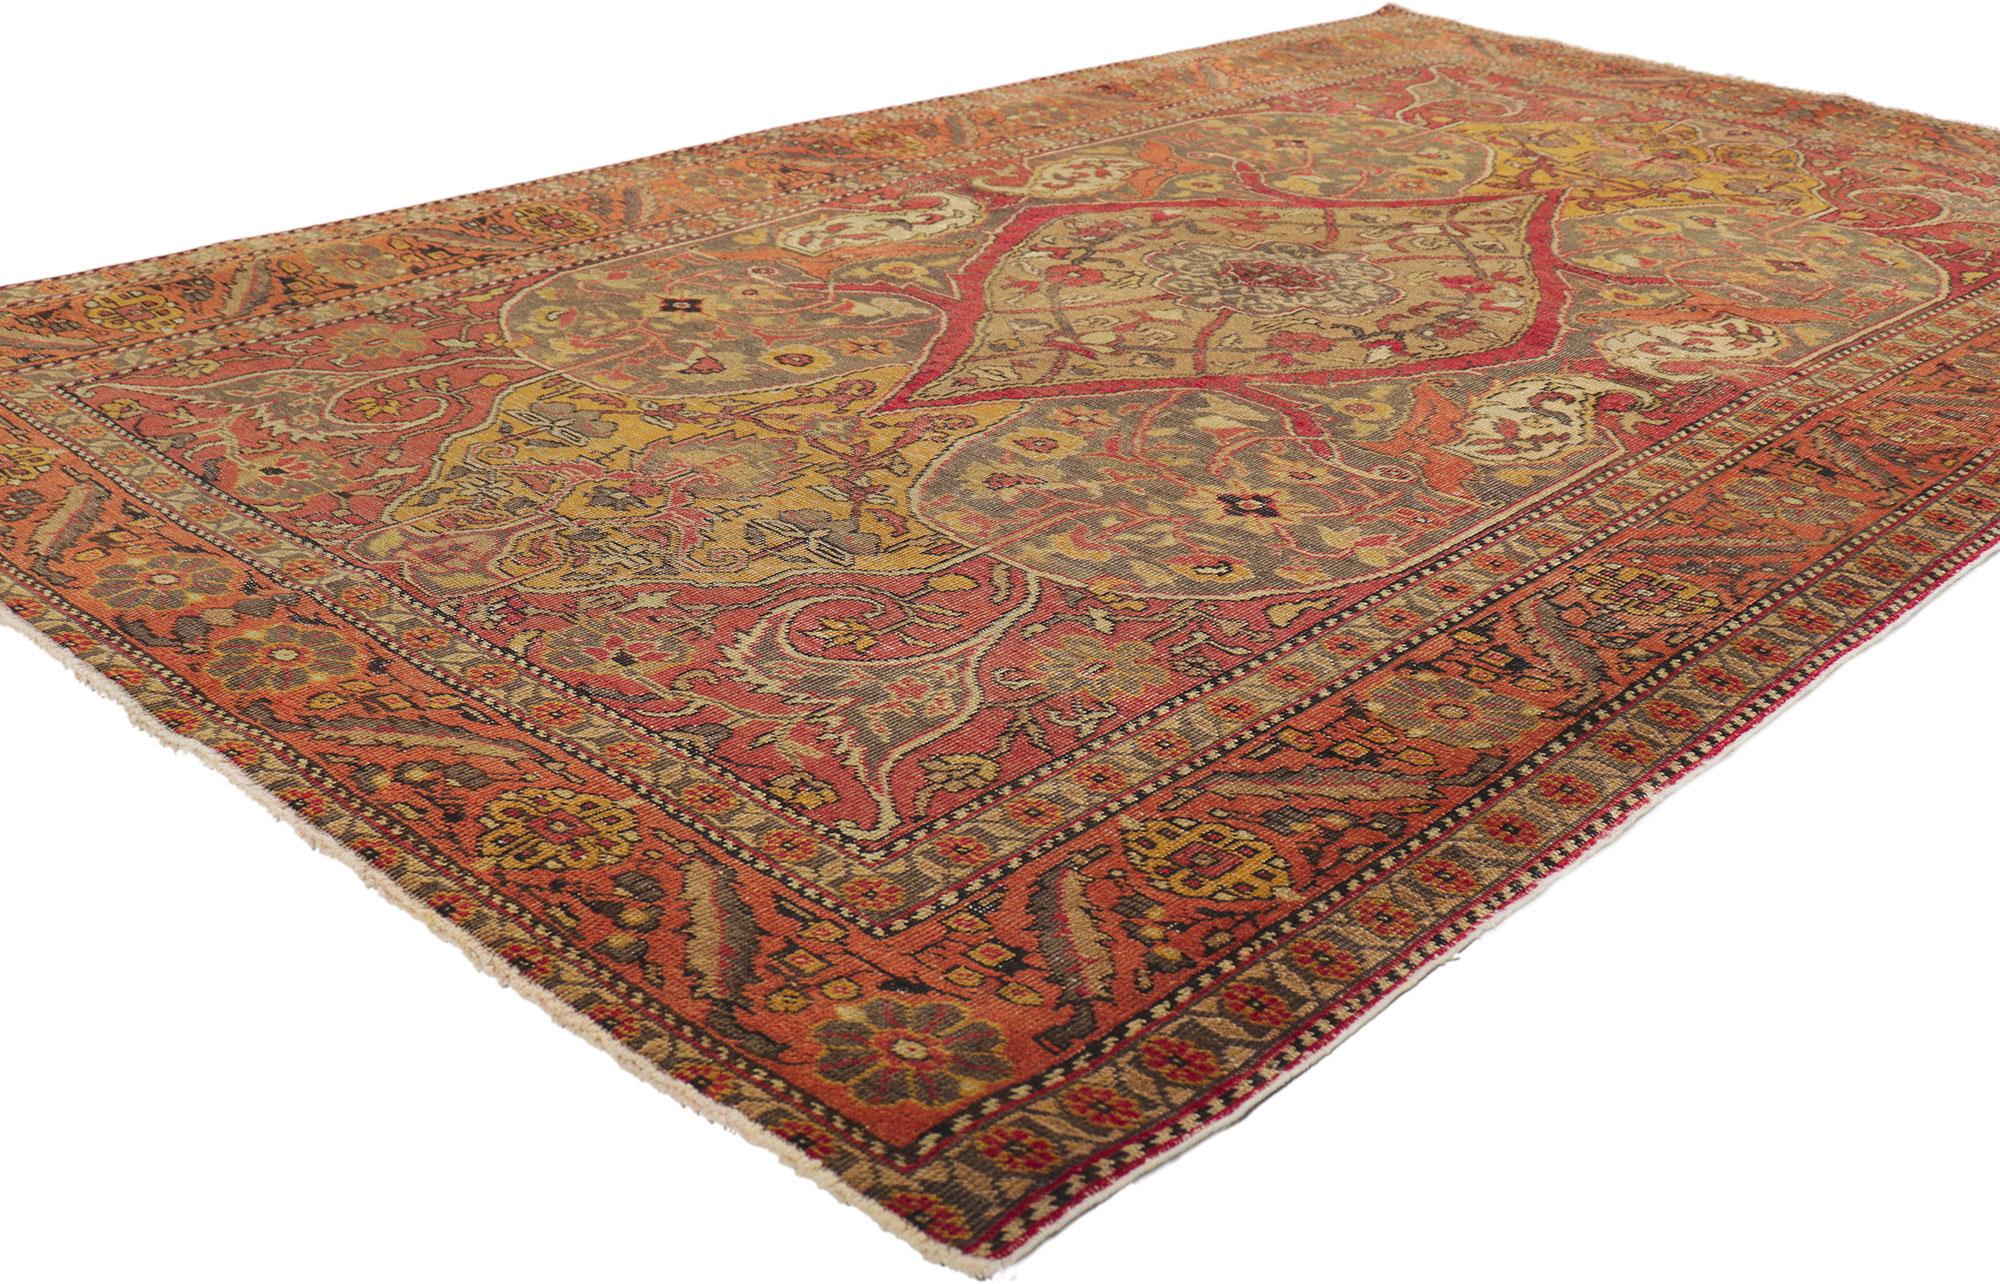 50572 Distressed Vintage Turkish Sivas Rug, ​04'07 x 07'07.
​Get ready to swoon over this woolen wonder. With its rustic sensibility, it's a rugged meets refined made made in heaven. The romantic botanical designs and warm earthy colorway can